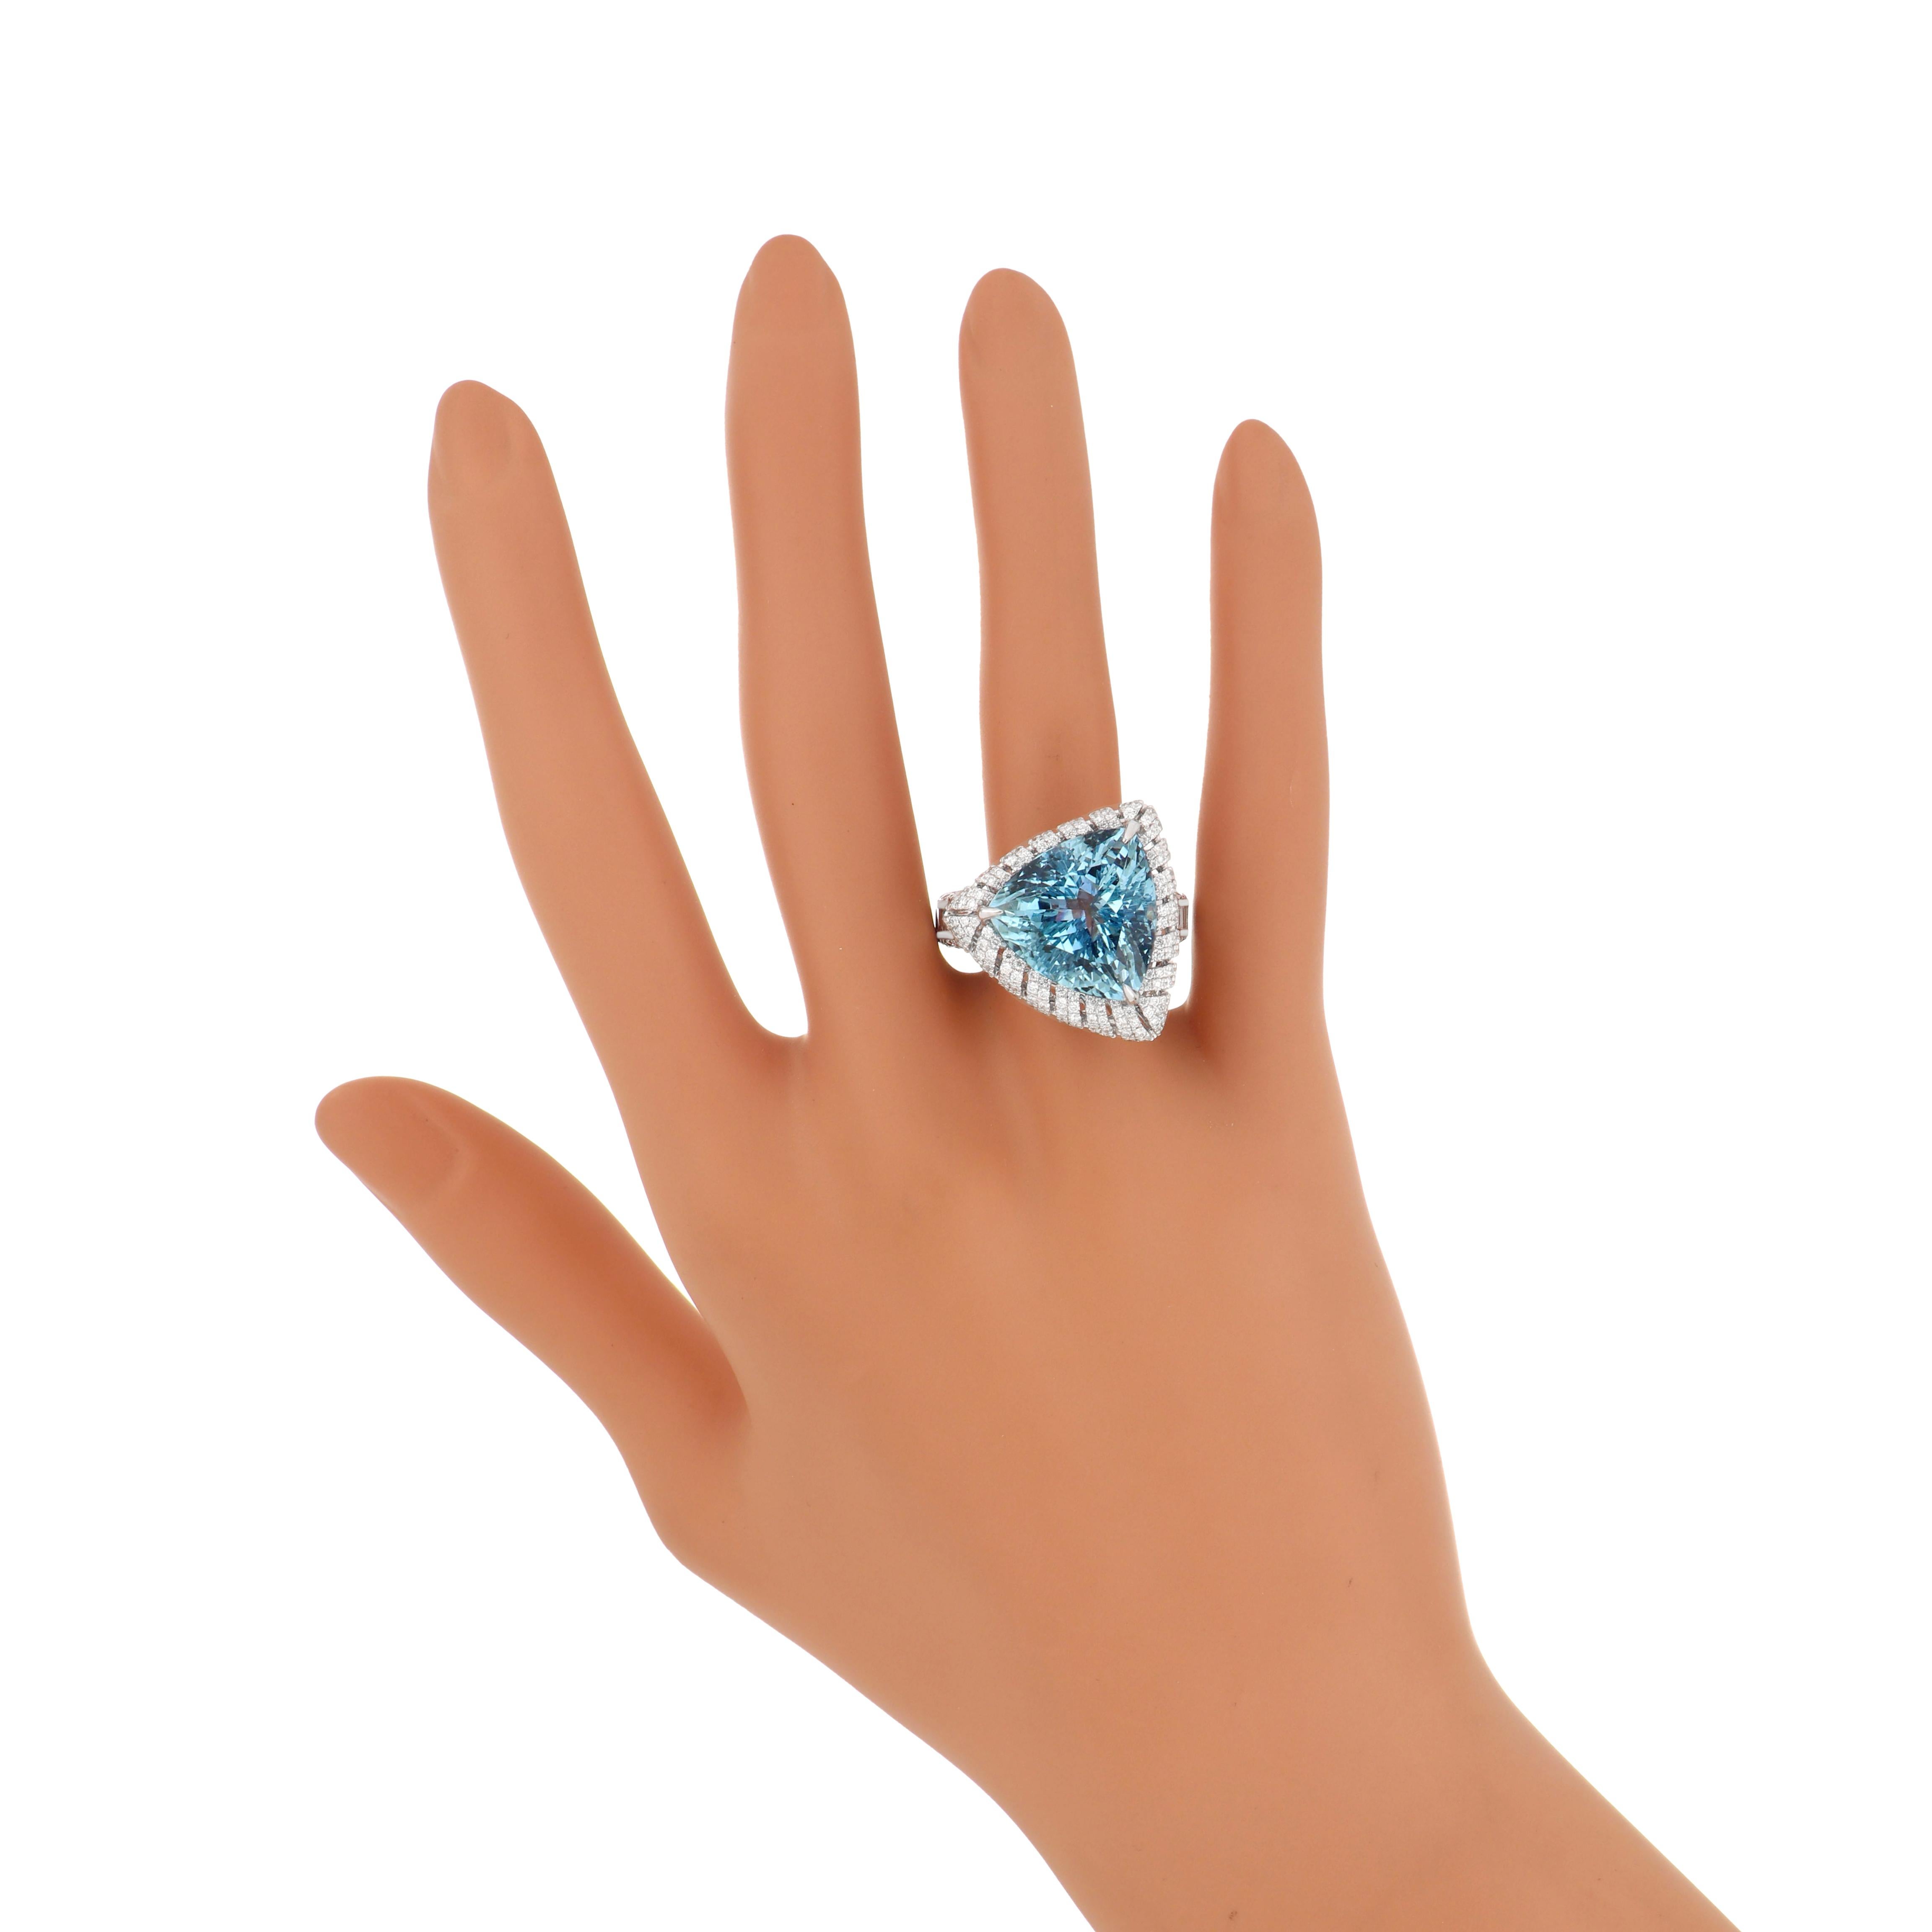 Step into the world of unparalleled luxury with our impeccably crafted 18 karat White Gold Ring. Gracing its center is a majestic 12.6 carat (approx.) Trillion Shape Aquamarine, radiating beauty and grace. Encircling this stunning gemstone is a halo